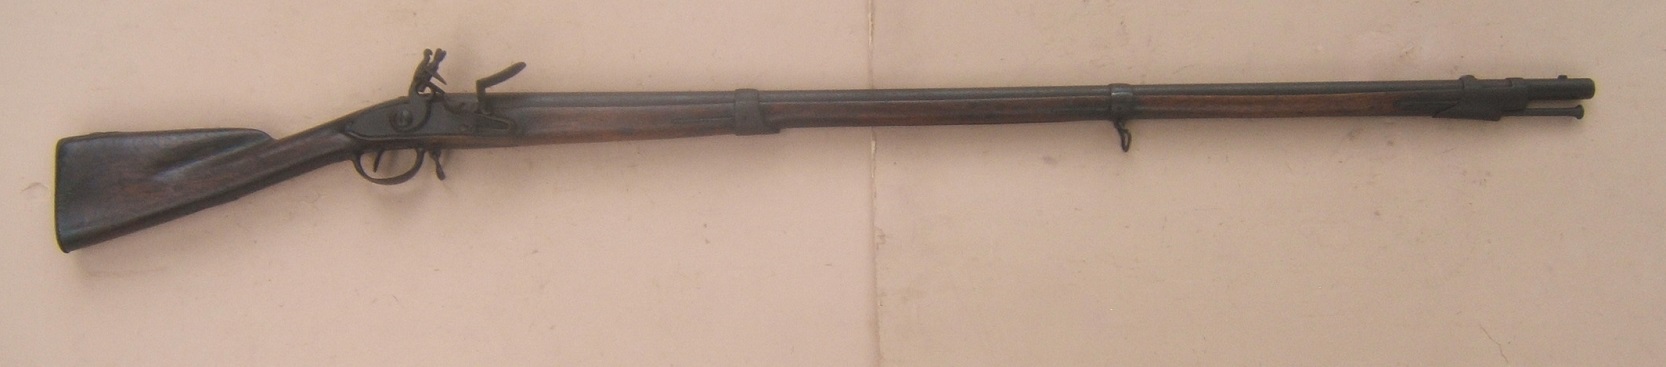  A VERY GOOD AMERICAN REVOLUTIONARY WAR FRENCH MODEL 1766/68 